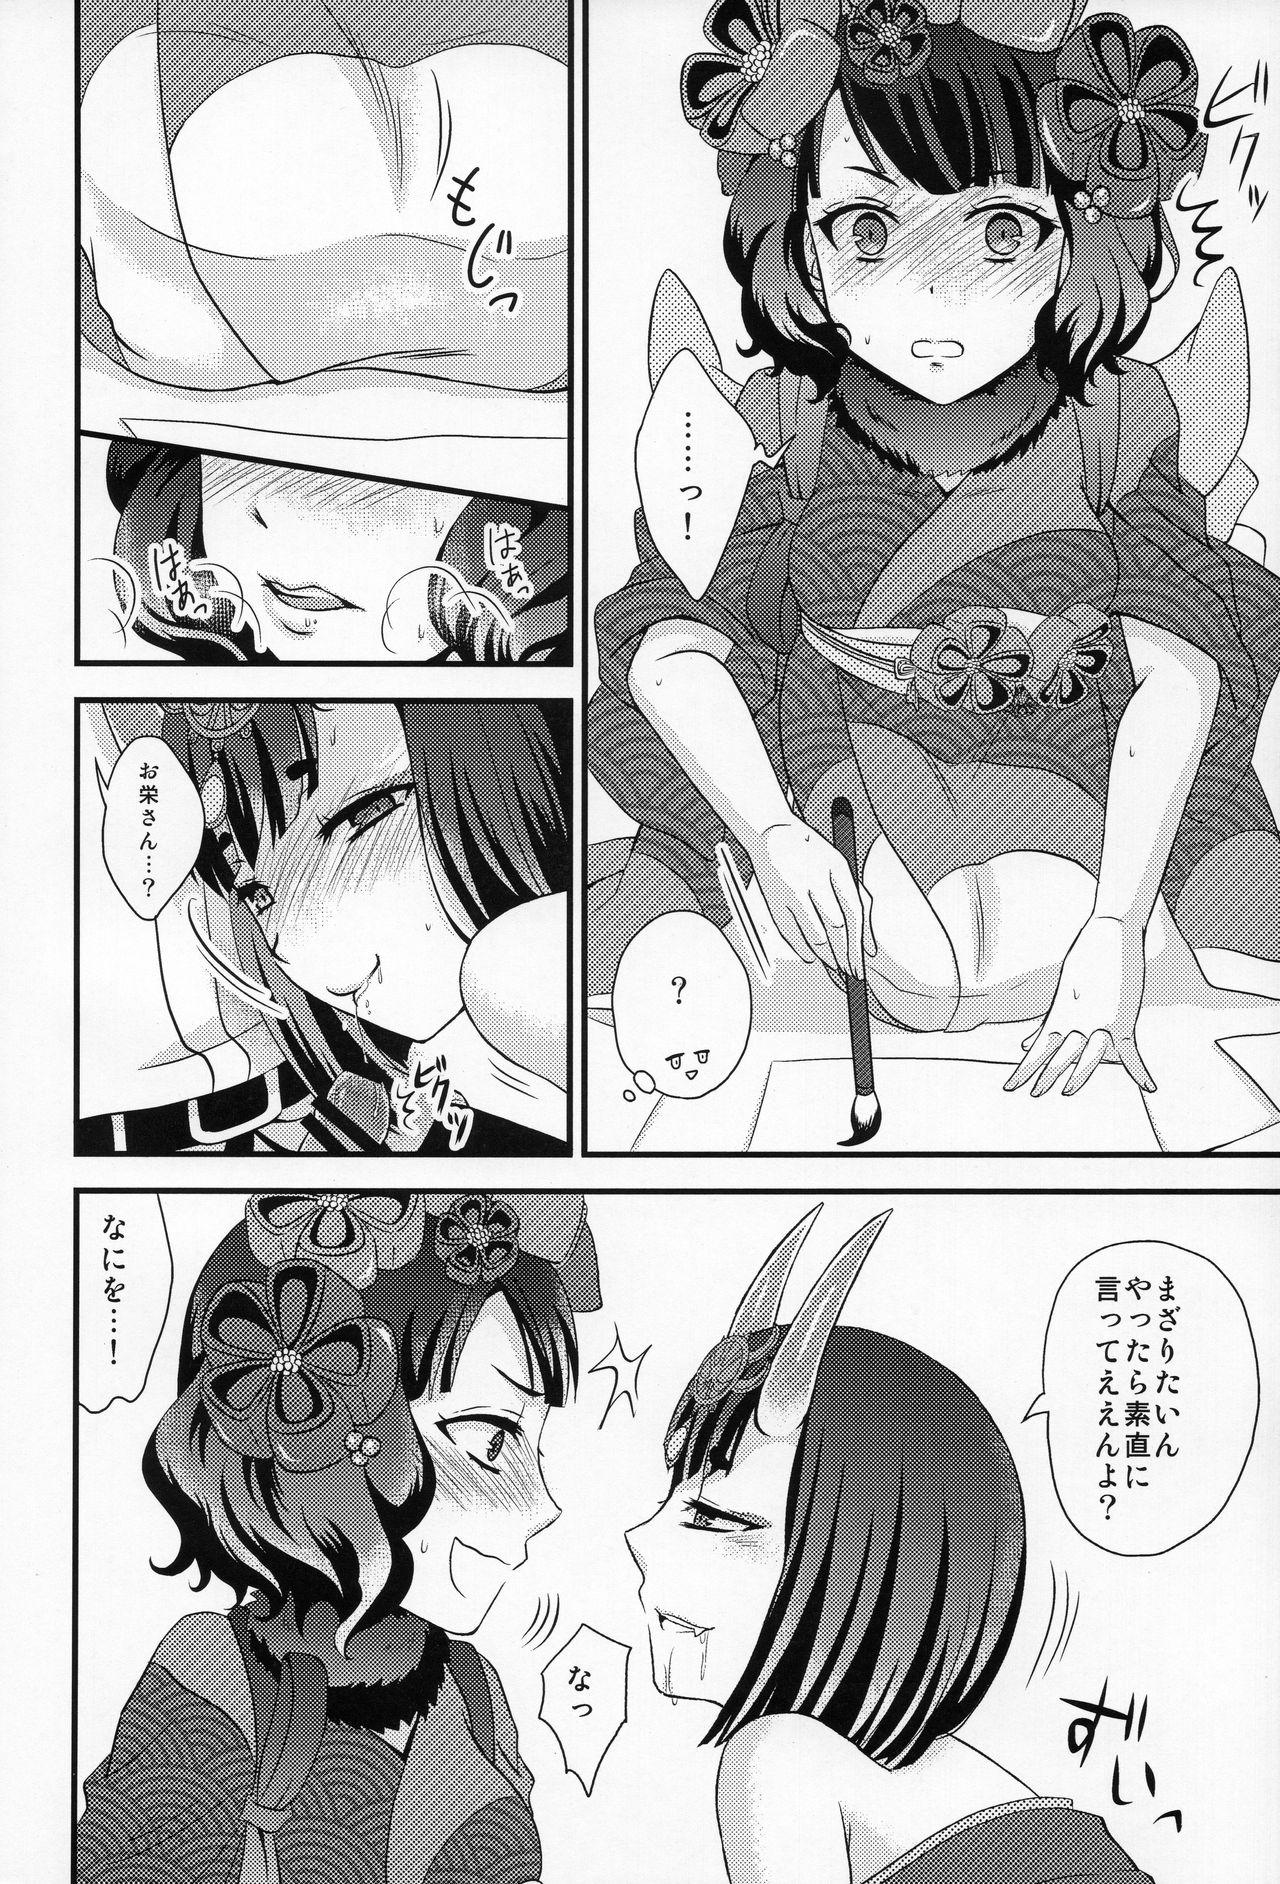 Whipping COMET:12 - Fate grand order Sexy Girl Sex - Page 8